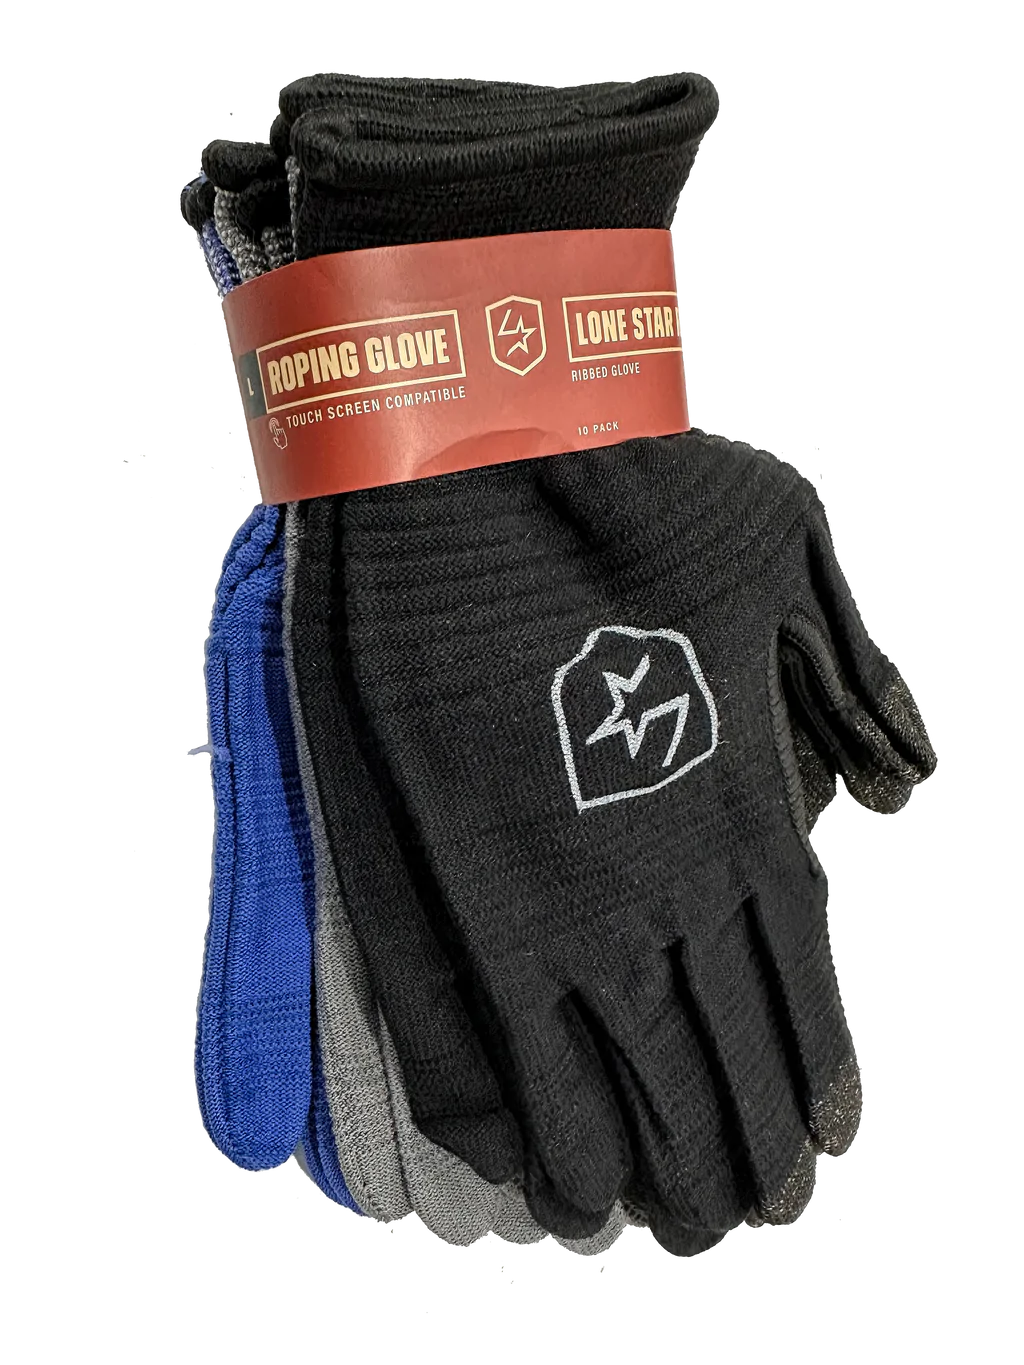 Lone Star Ribbed Roping Glove